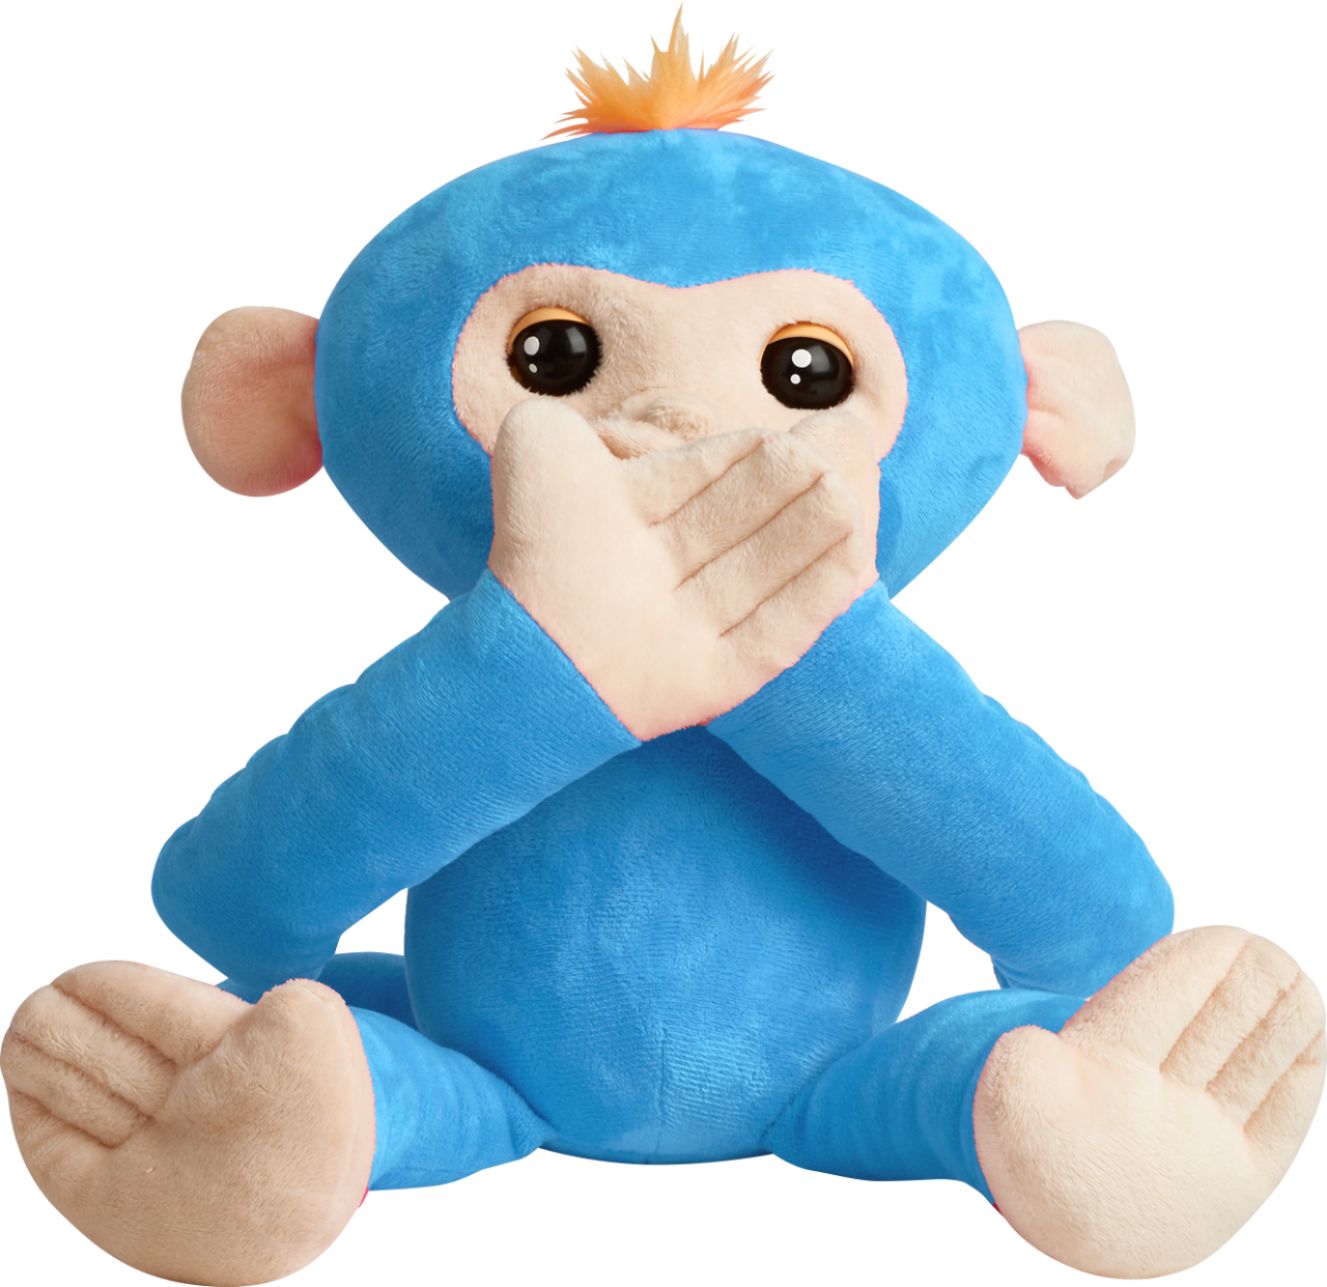 Authentic Fingerlings Baby Monkey Boris Interactive Must Have Toy Ready To Ship 